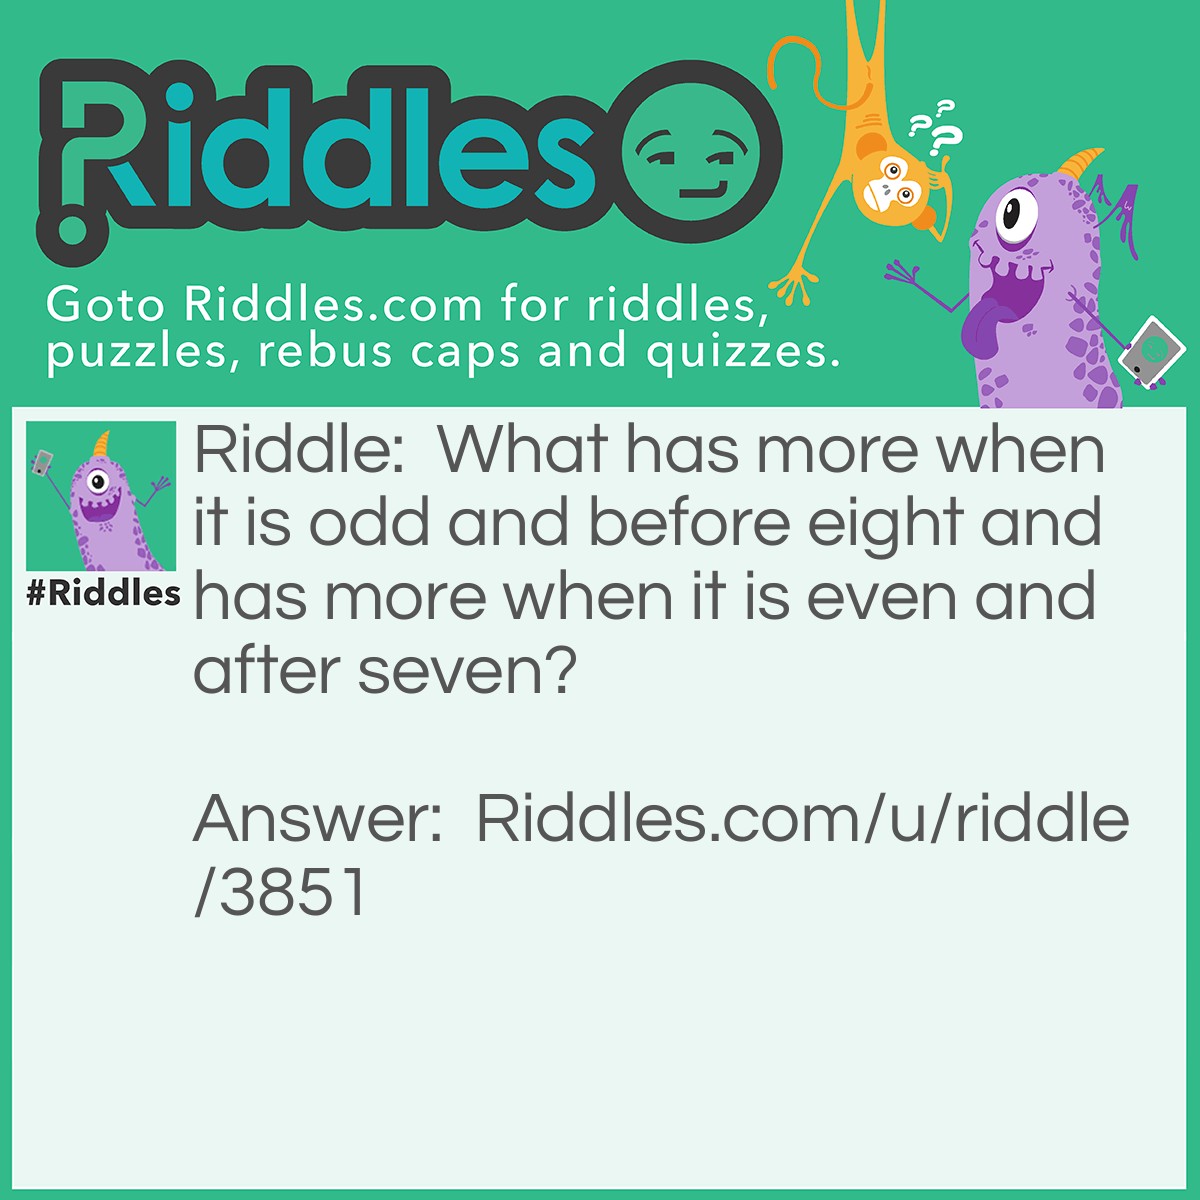 Riddle: What has more when it is odd and before eight and has more when it is even and after seven? Answer: Looking for a good, clean answer for this one.